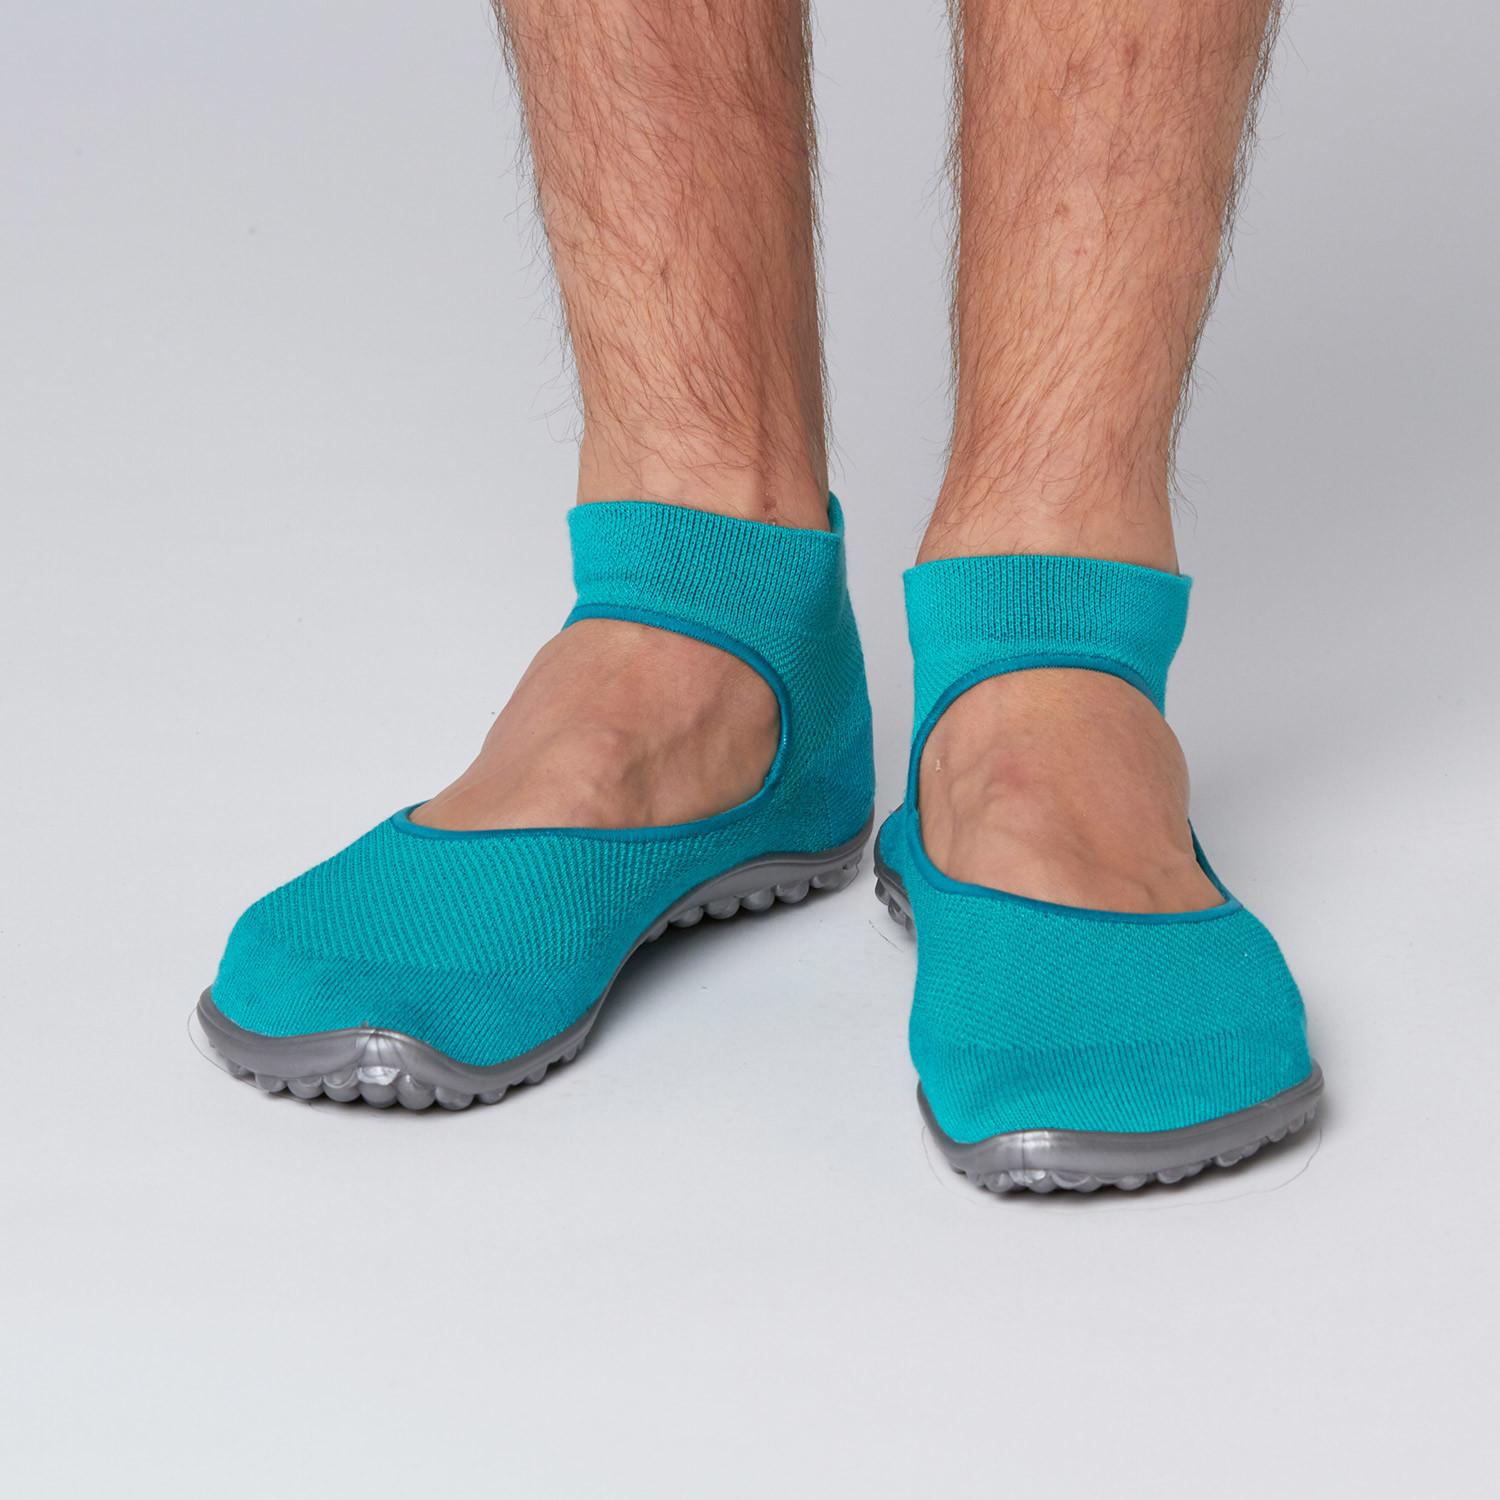 Ballerina Barefoot Shoe // Turquoise (Size 36-37) - Leguano - Touch of ...